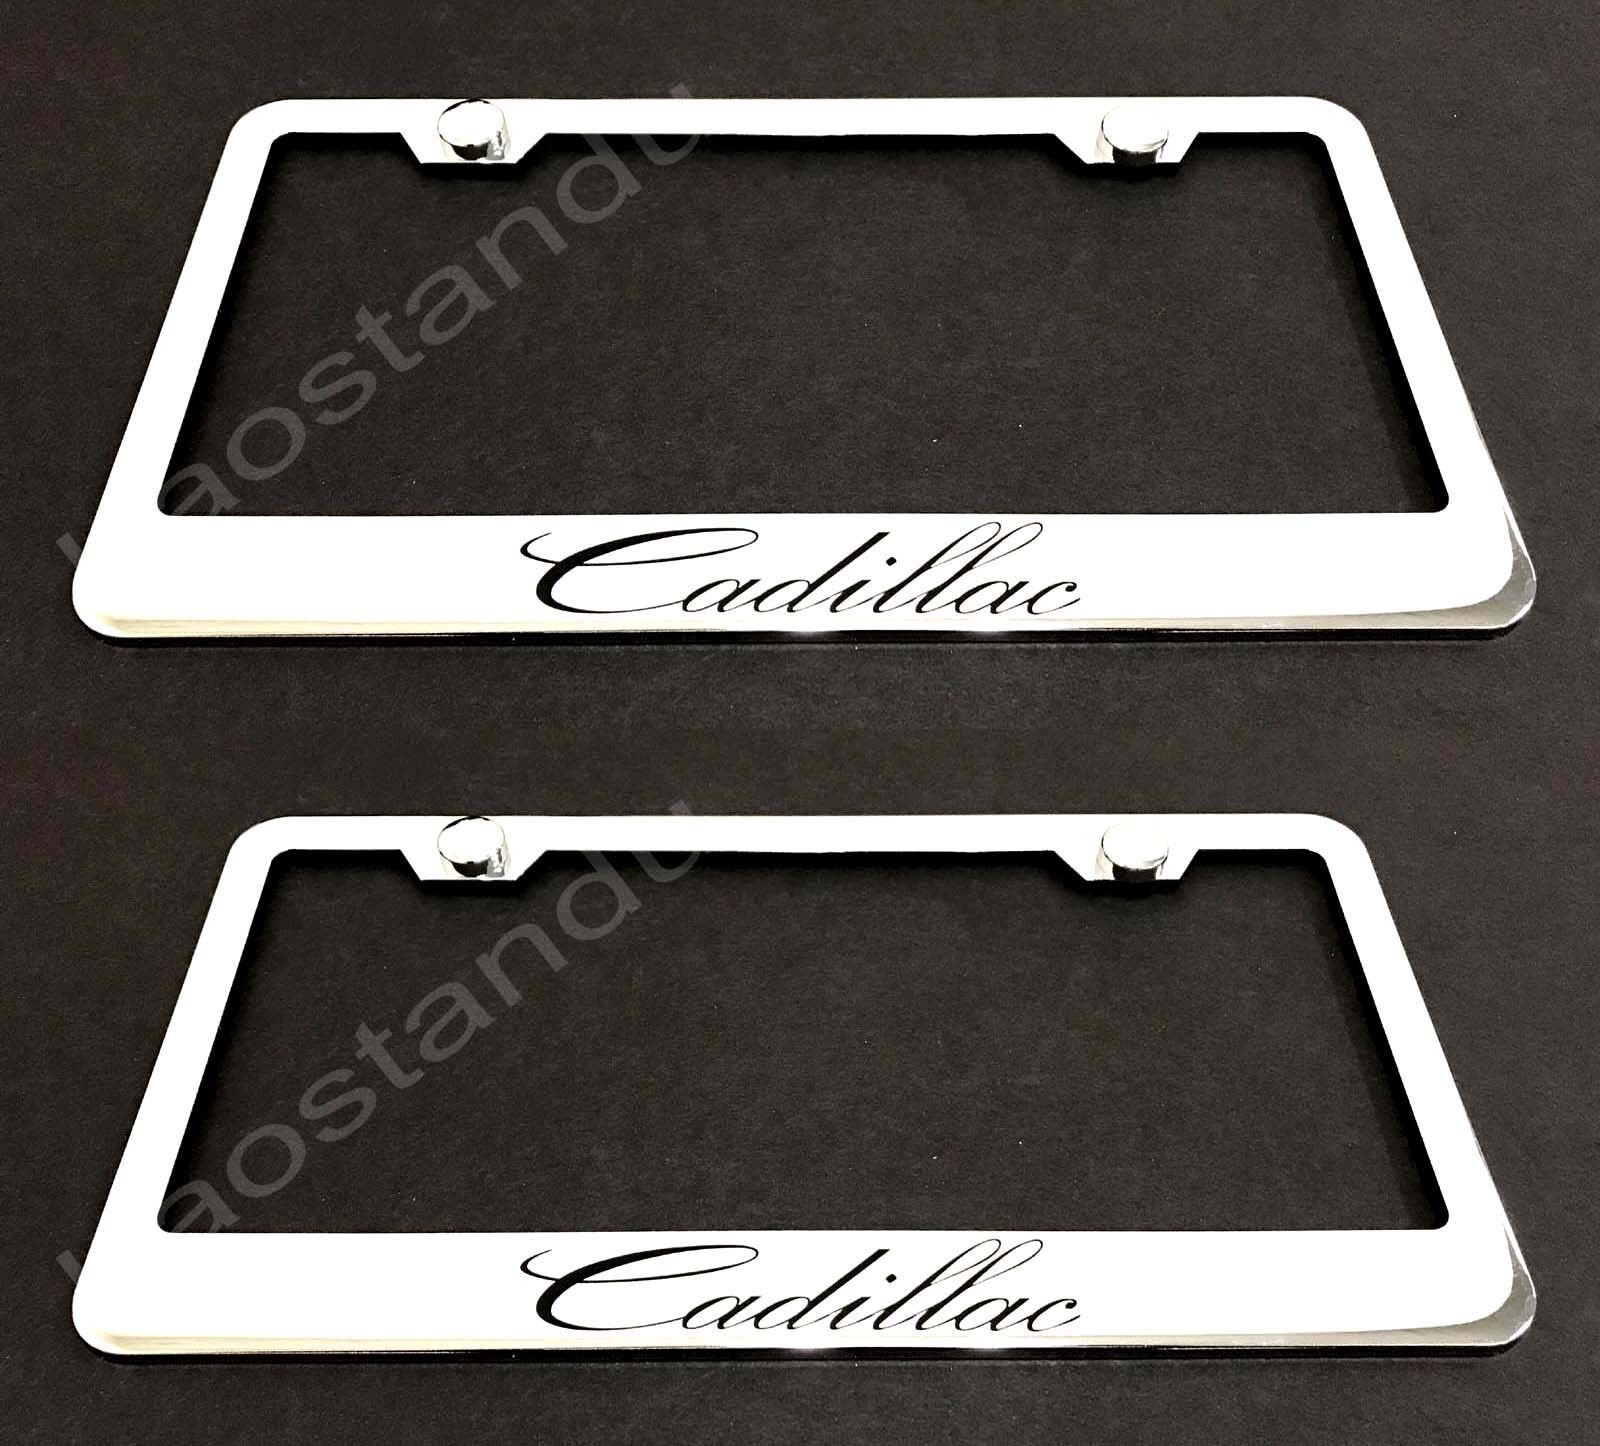 2xCadillacStyle STAINLESS Chrome License Plate Frame w/screw Caps